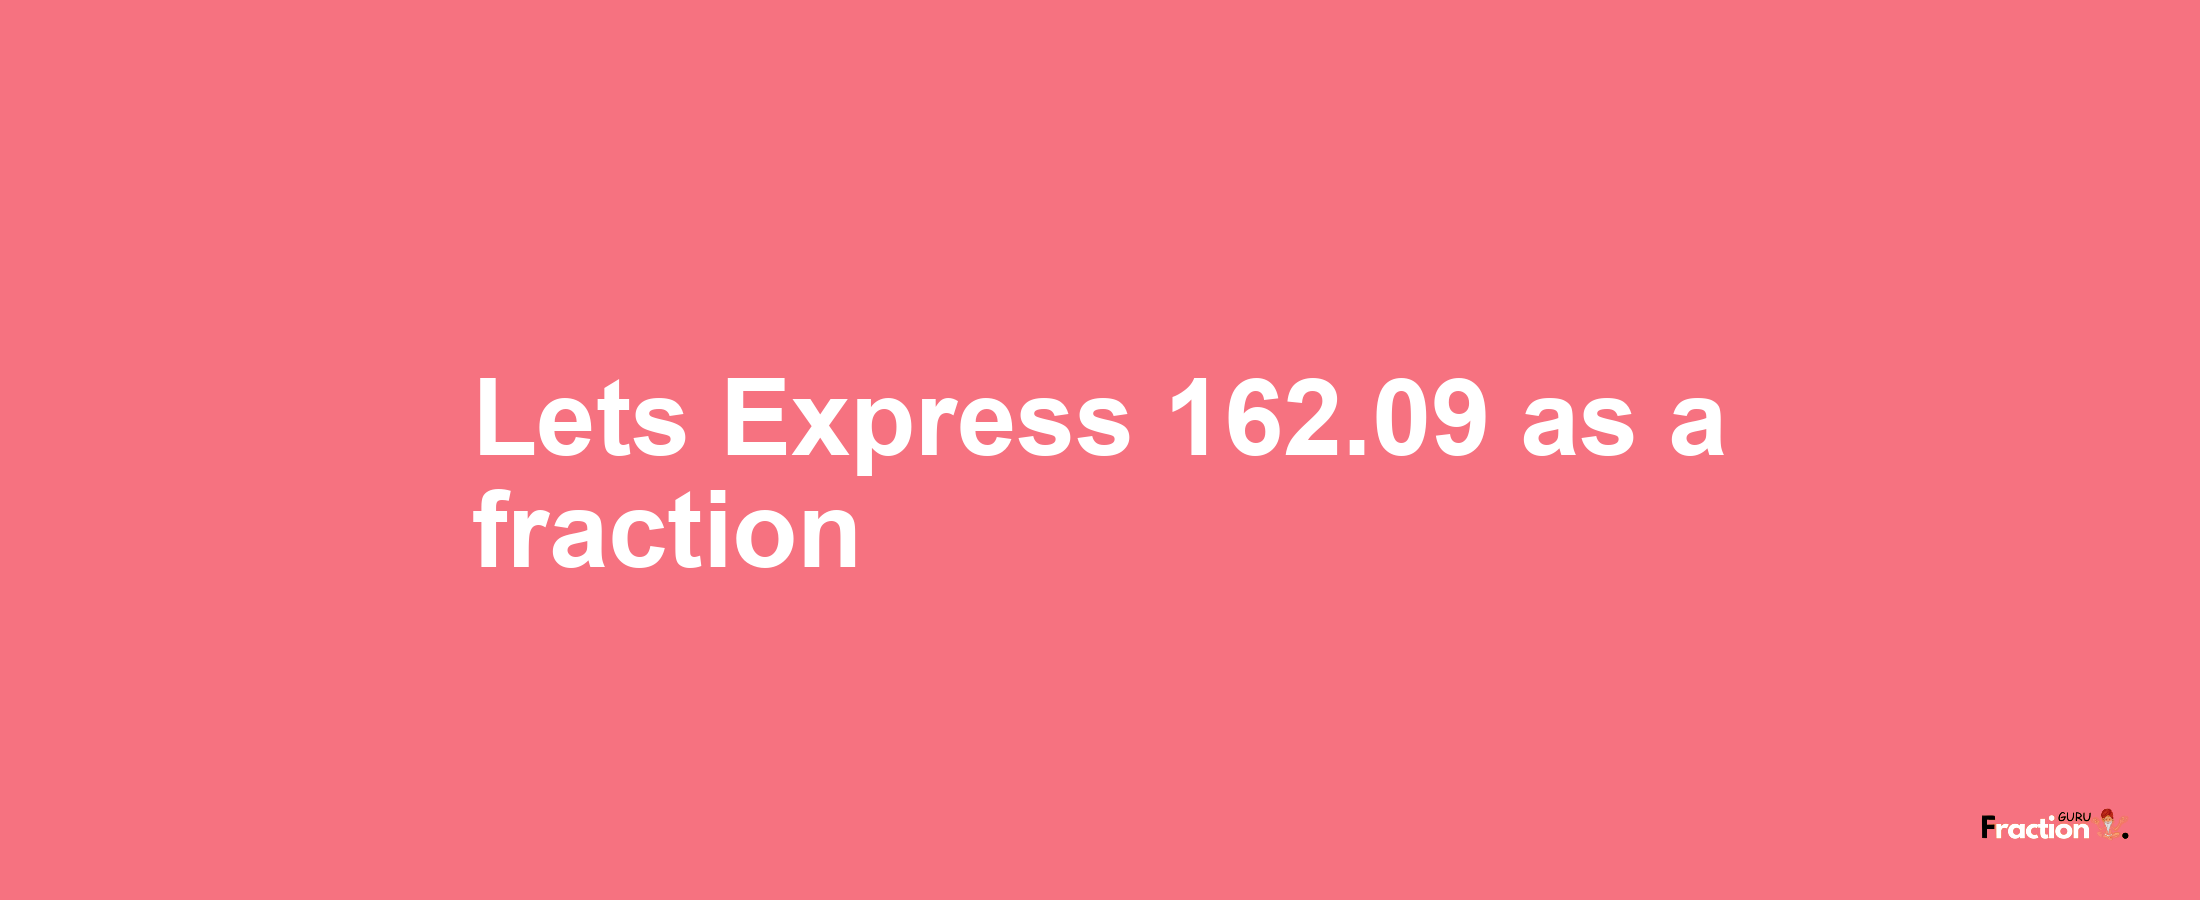 Lets Express 162.09 as afraction